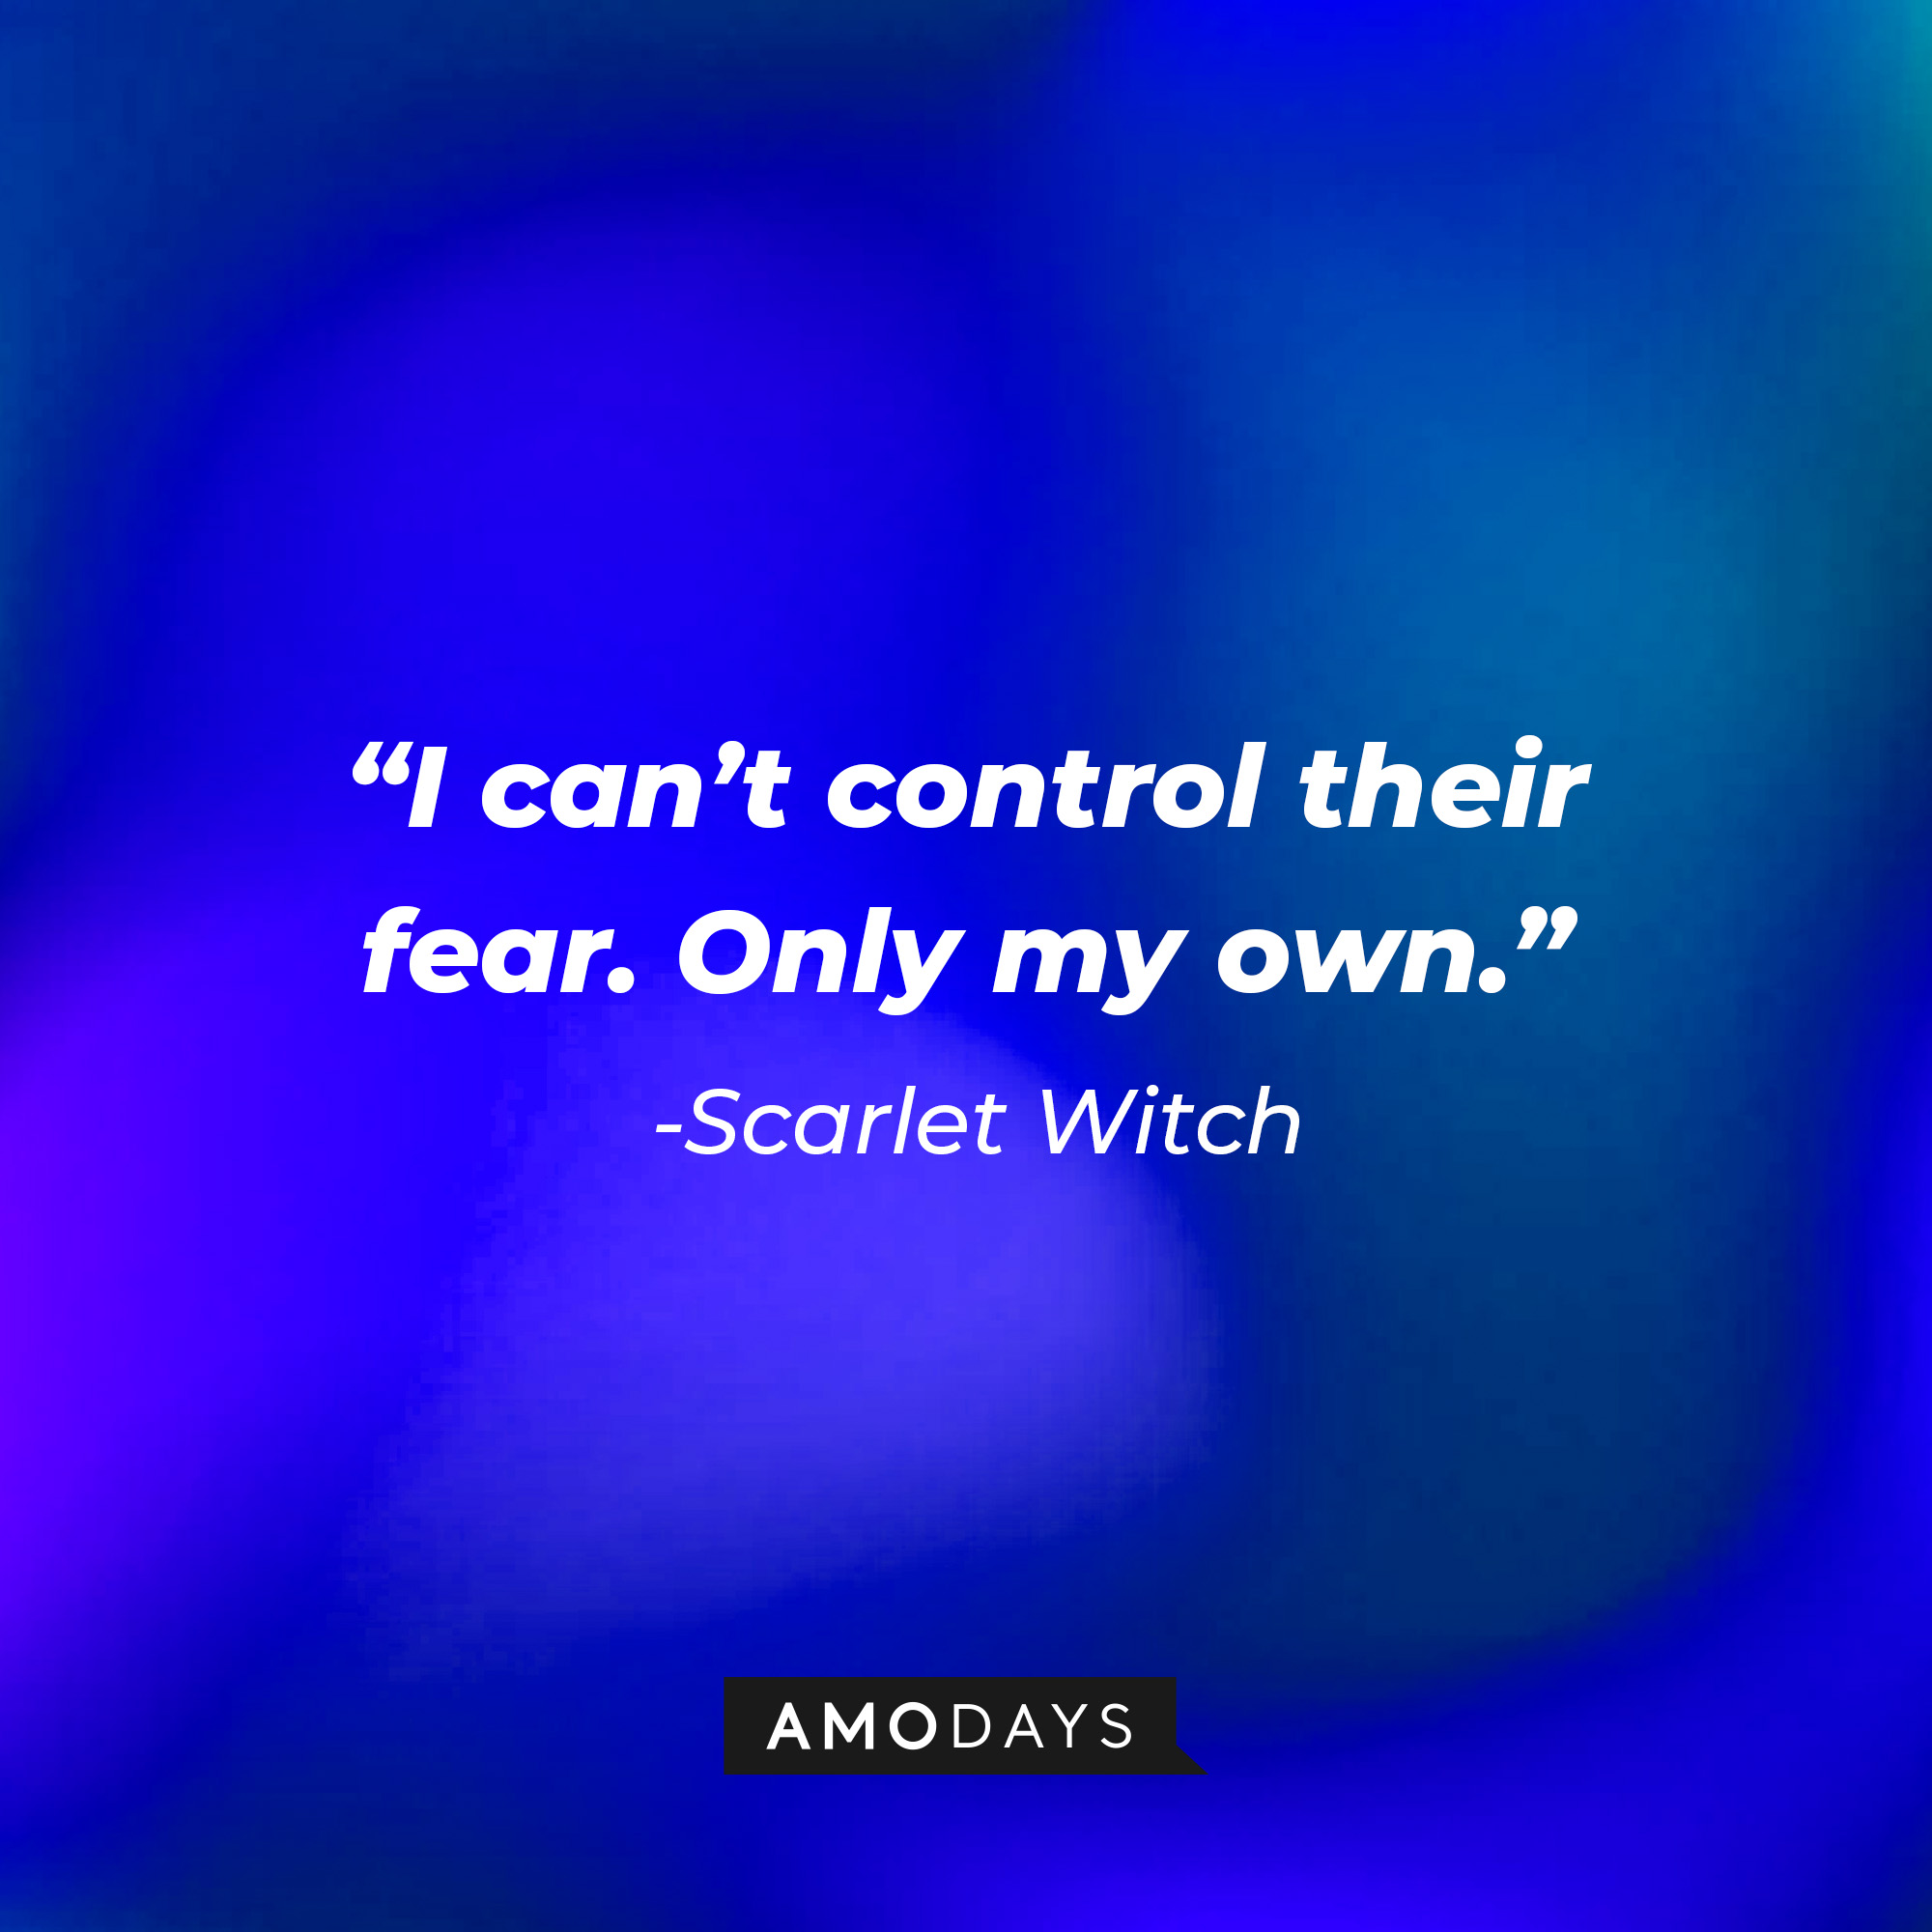 Scarlet Witch’s quote: “I can’t control their fear. Only my own.” | Source: AmoDays